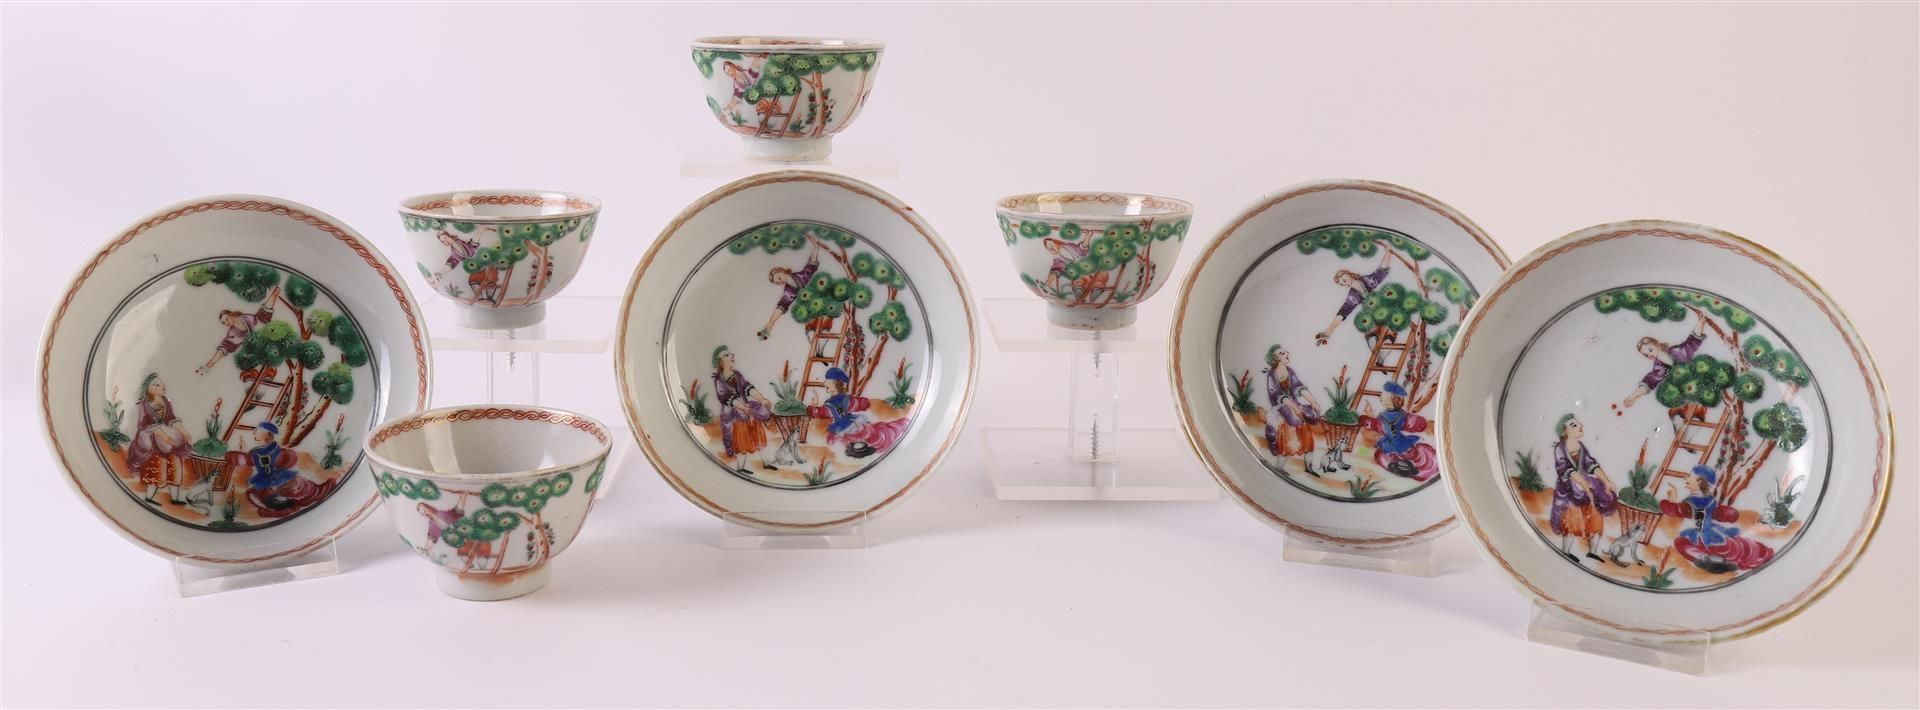 Four porcelain cups and accompanying saucers, Chine de Commande, China, Qianlong, 18th century.